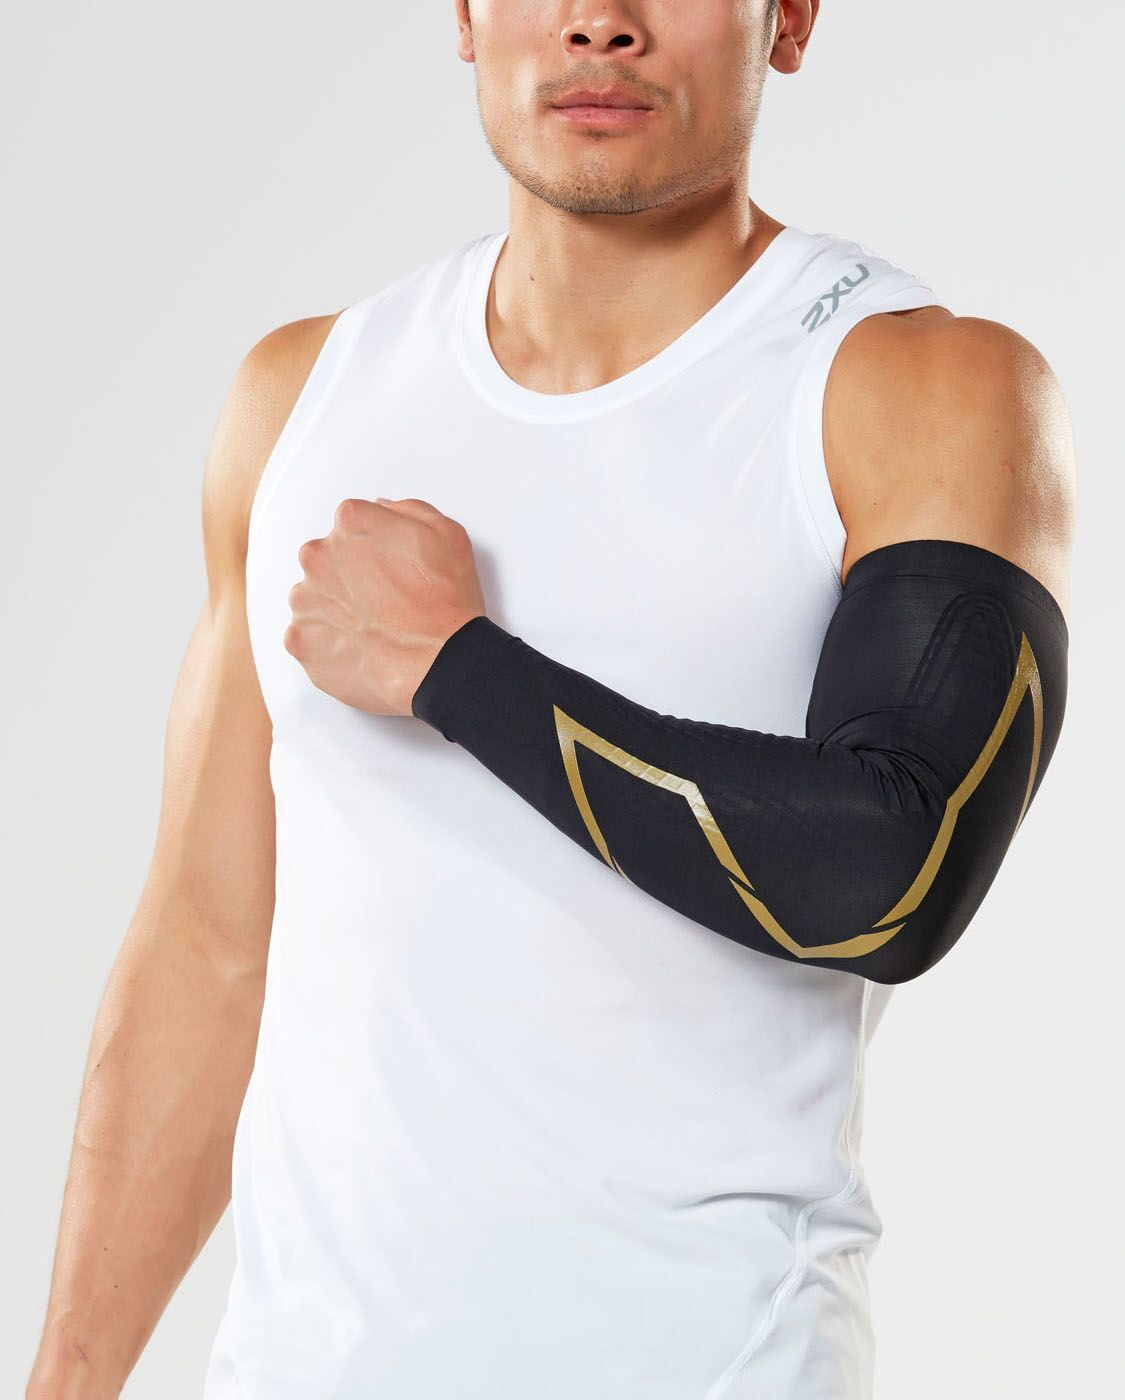 2XU South Africa - Force Compression Arm Guards - Black/Gold